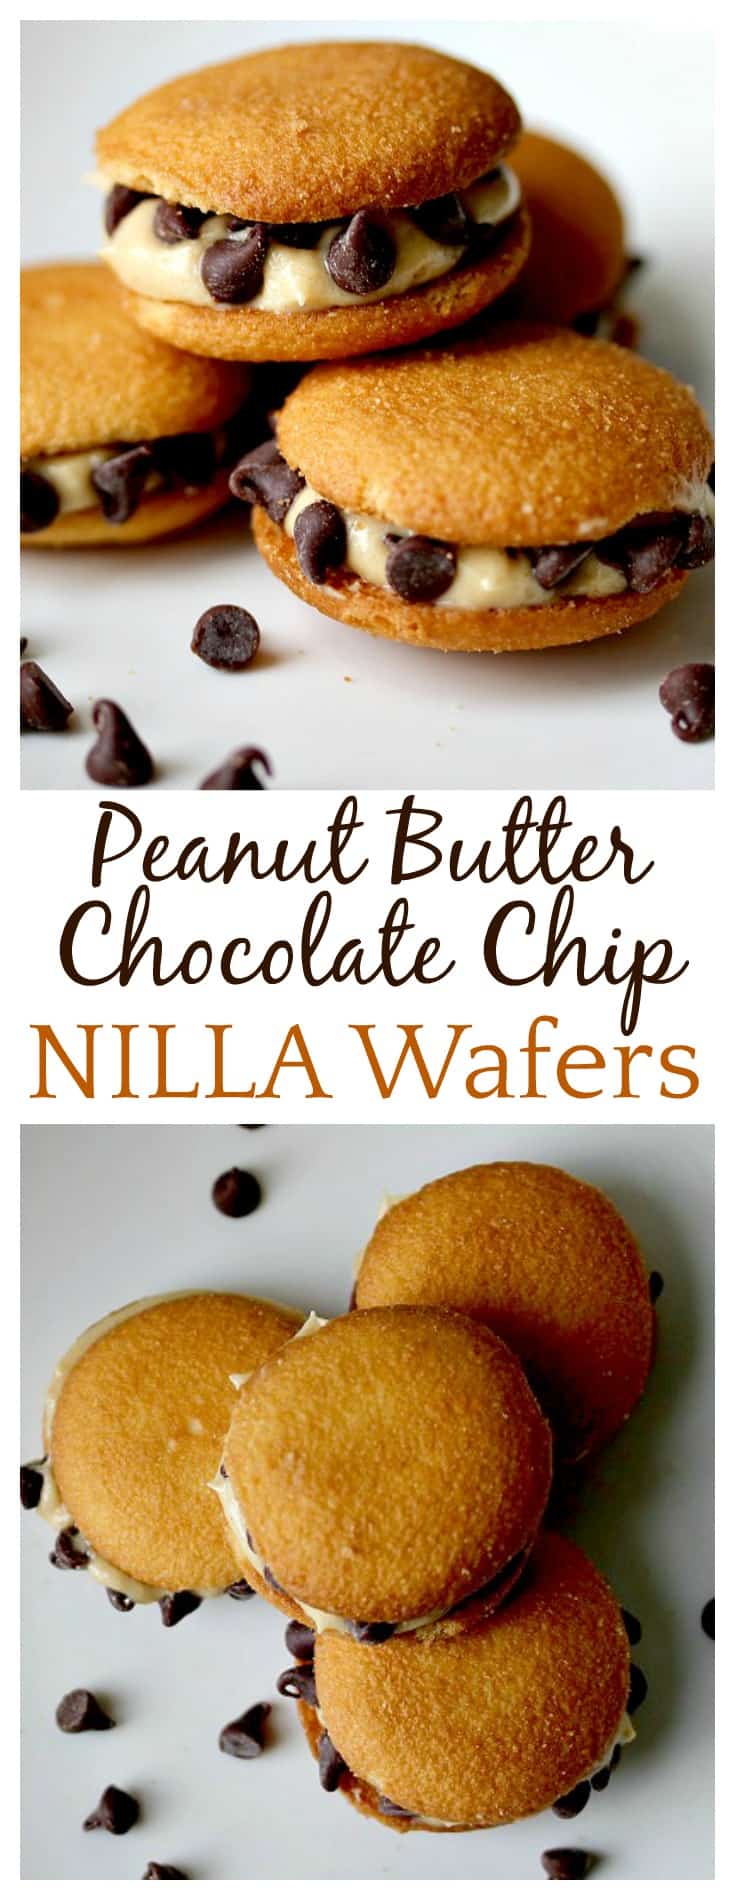 Such a fun, yummy cookie recipe! Leave Santa a little something new this Christmas with these Peanut Butter Chocolate Chip NILLA Wafer Sandwiches - creamy peanut butter icing topped with mini chocolate chips squeezed between two crunchy NILLA wafers!